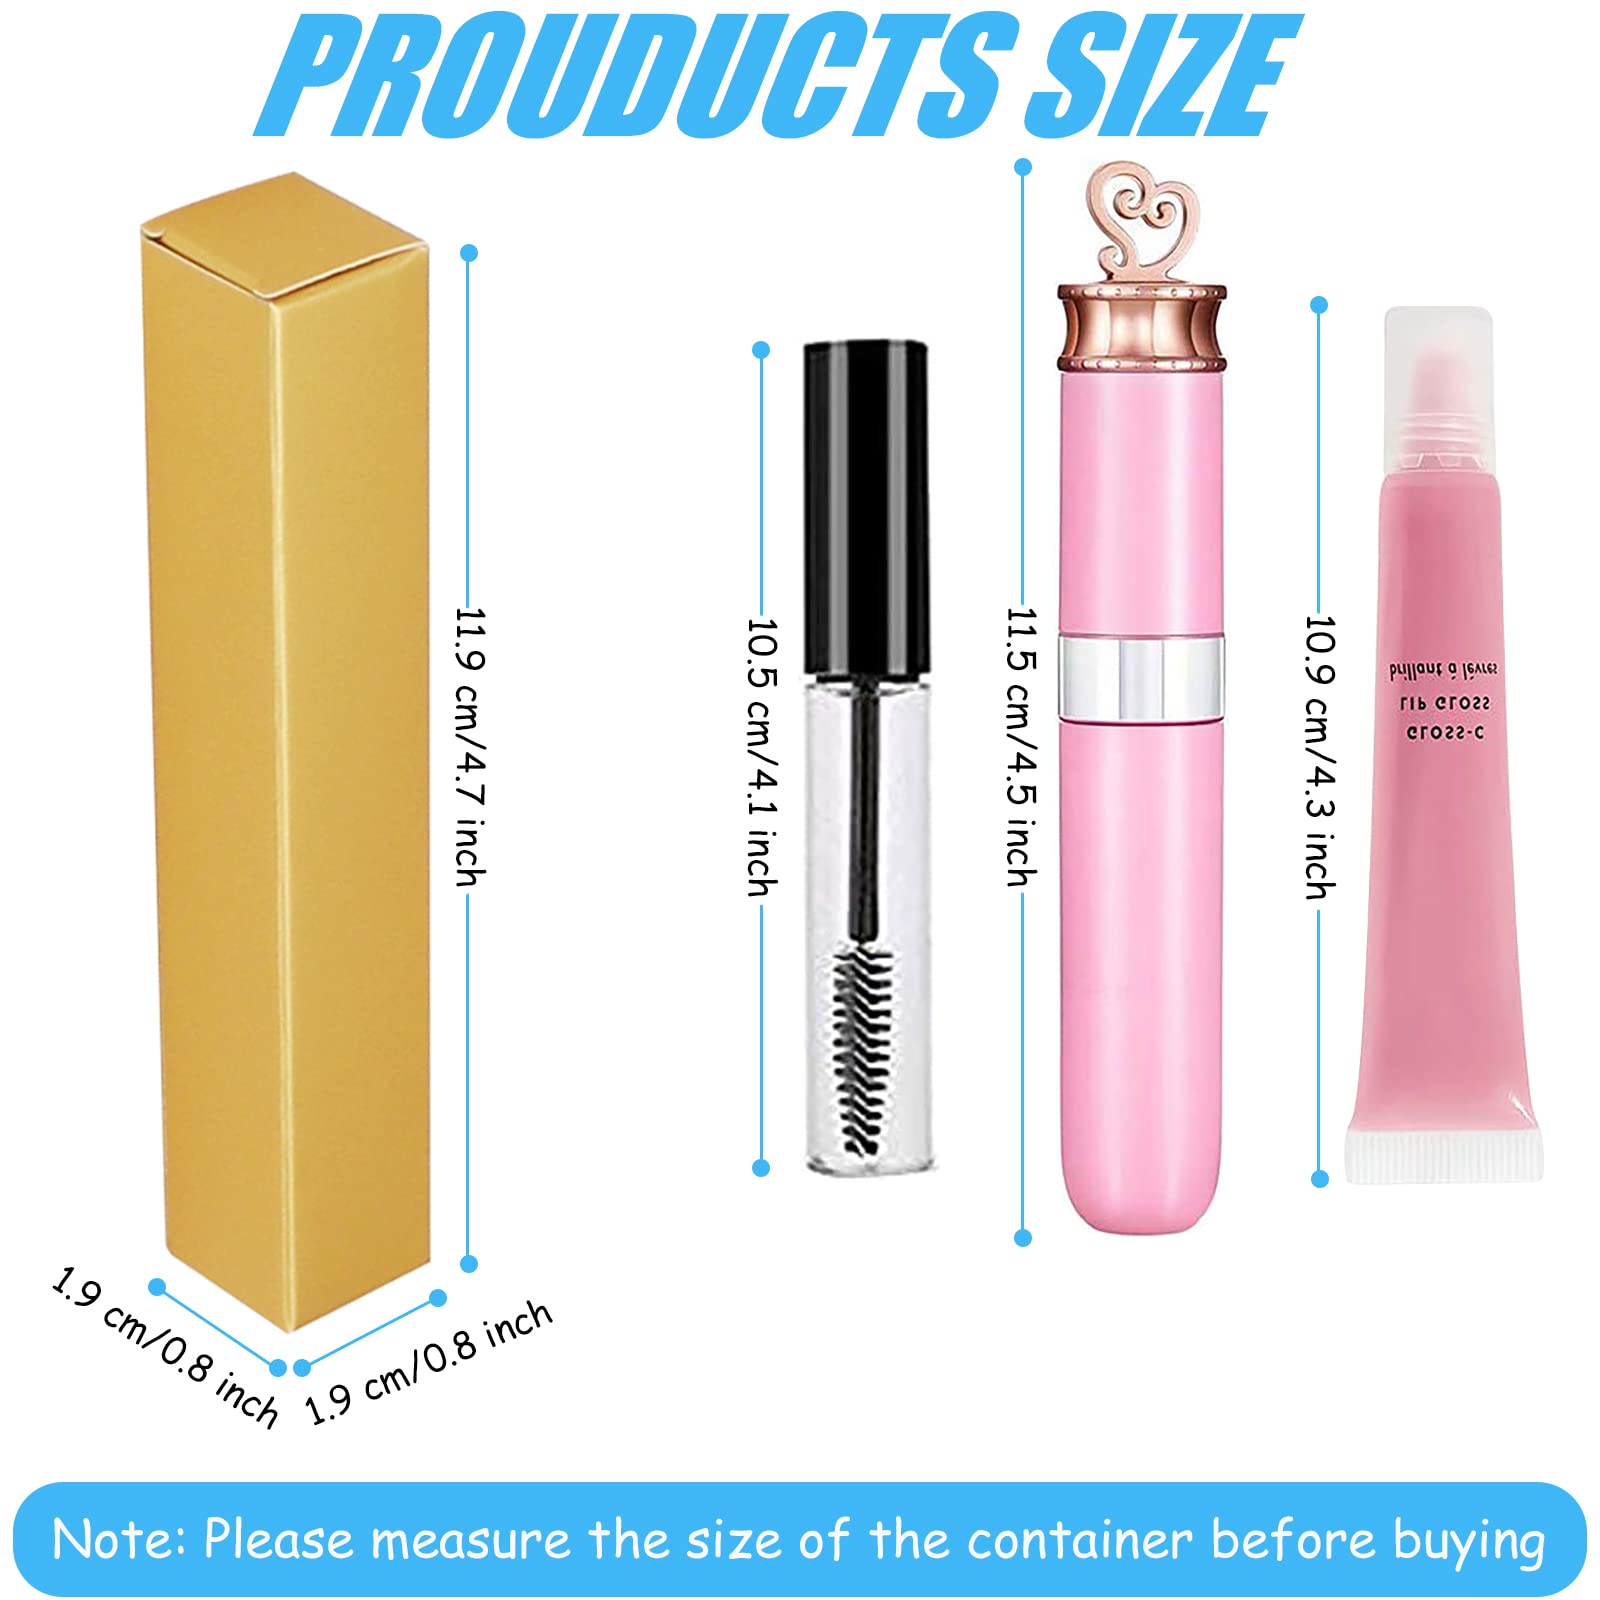 Lip Gloss Packaging,Empty Paper Boxes for Lipgloss Packaging Lip Gloss Boxes,Mascara Wand Tube Boxes Long Gold Lipgloss Case,Foldable Sample Wrapping DIY Makeup Organzier Storage(50PCS 4.7x0.8x0.8)